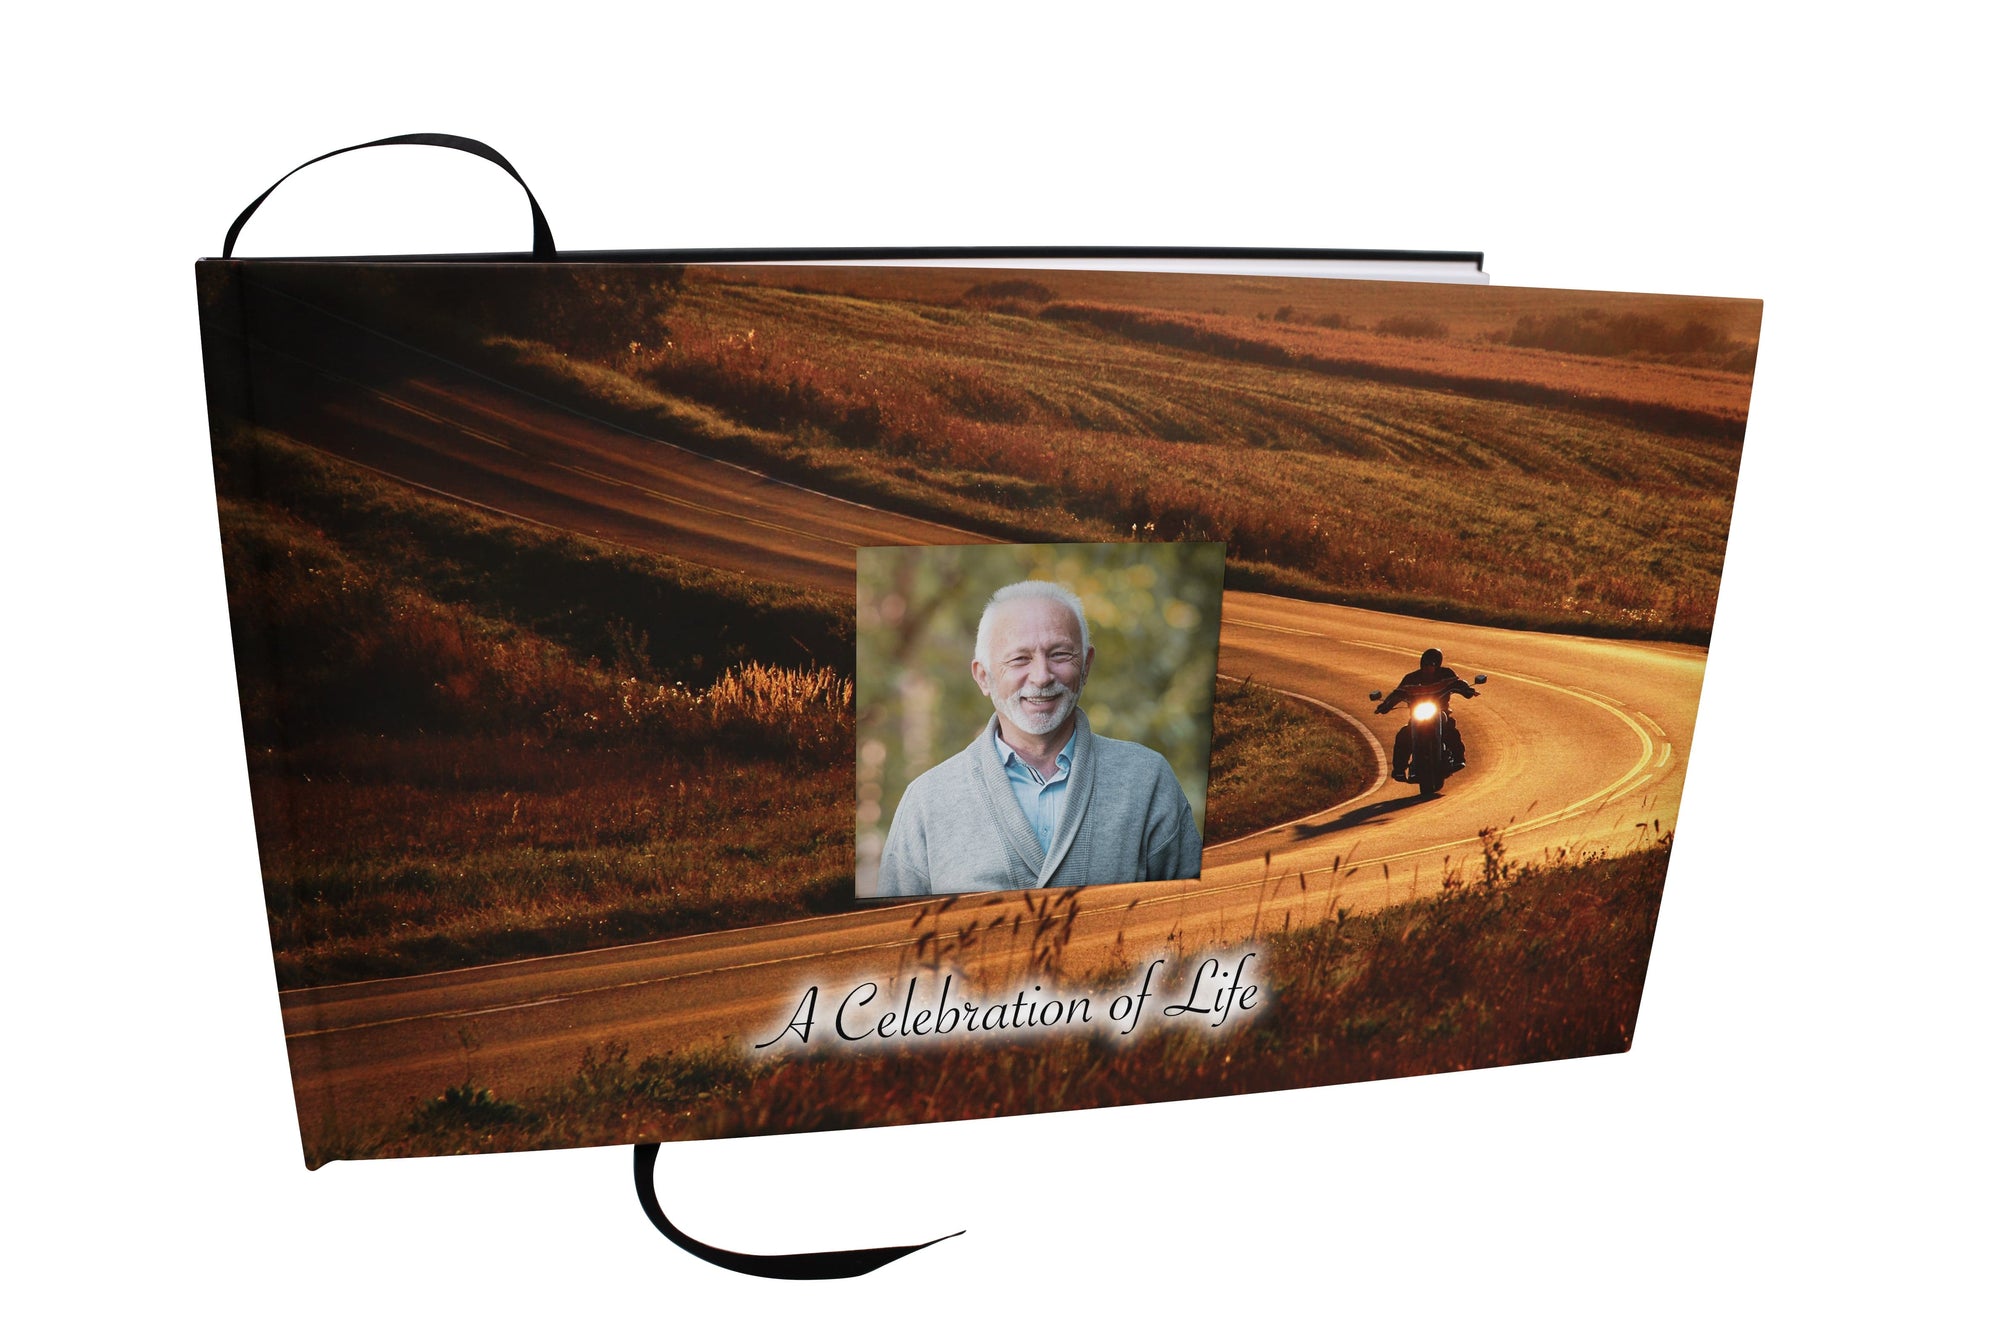 Commemorative Cremation Urns Motorcycle Matching Themed 'Celebration of Life' Guest Book for Funeral or Memorial Service